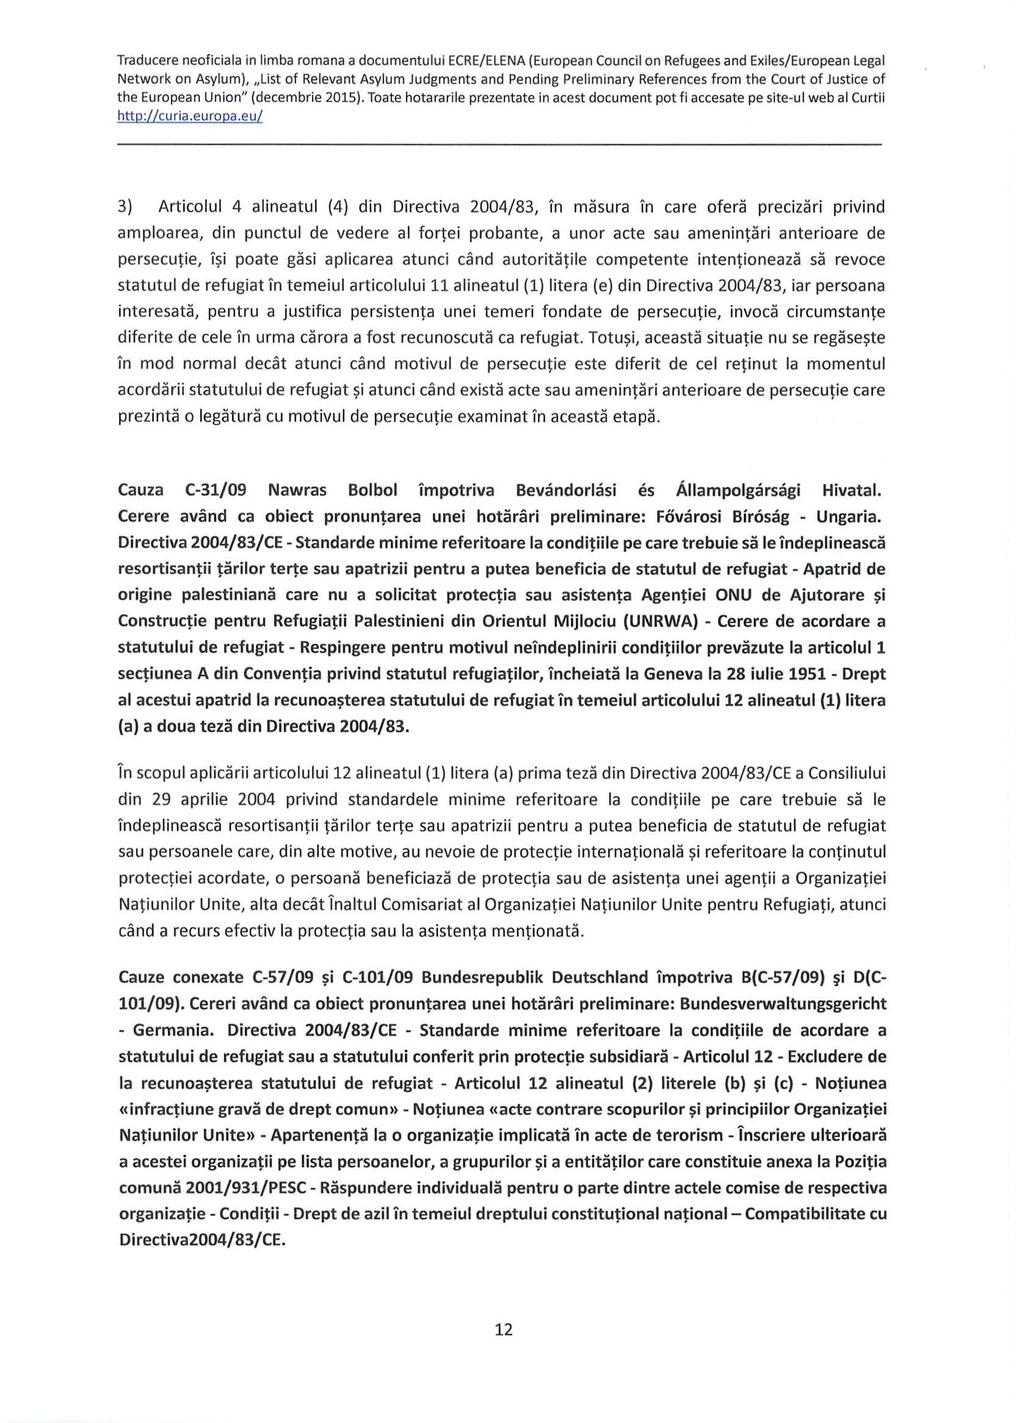 Traducere neoficiala in limba romana a document ului ECRE/ELENA (Euro pean Council on Refugees and Exiles/European Legal Network o n Asylum), List of Releva nt Asylum Judgments and Pending